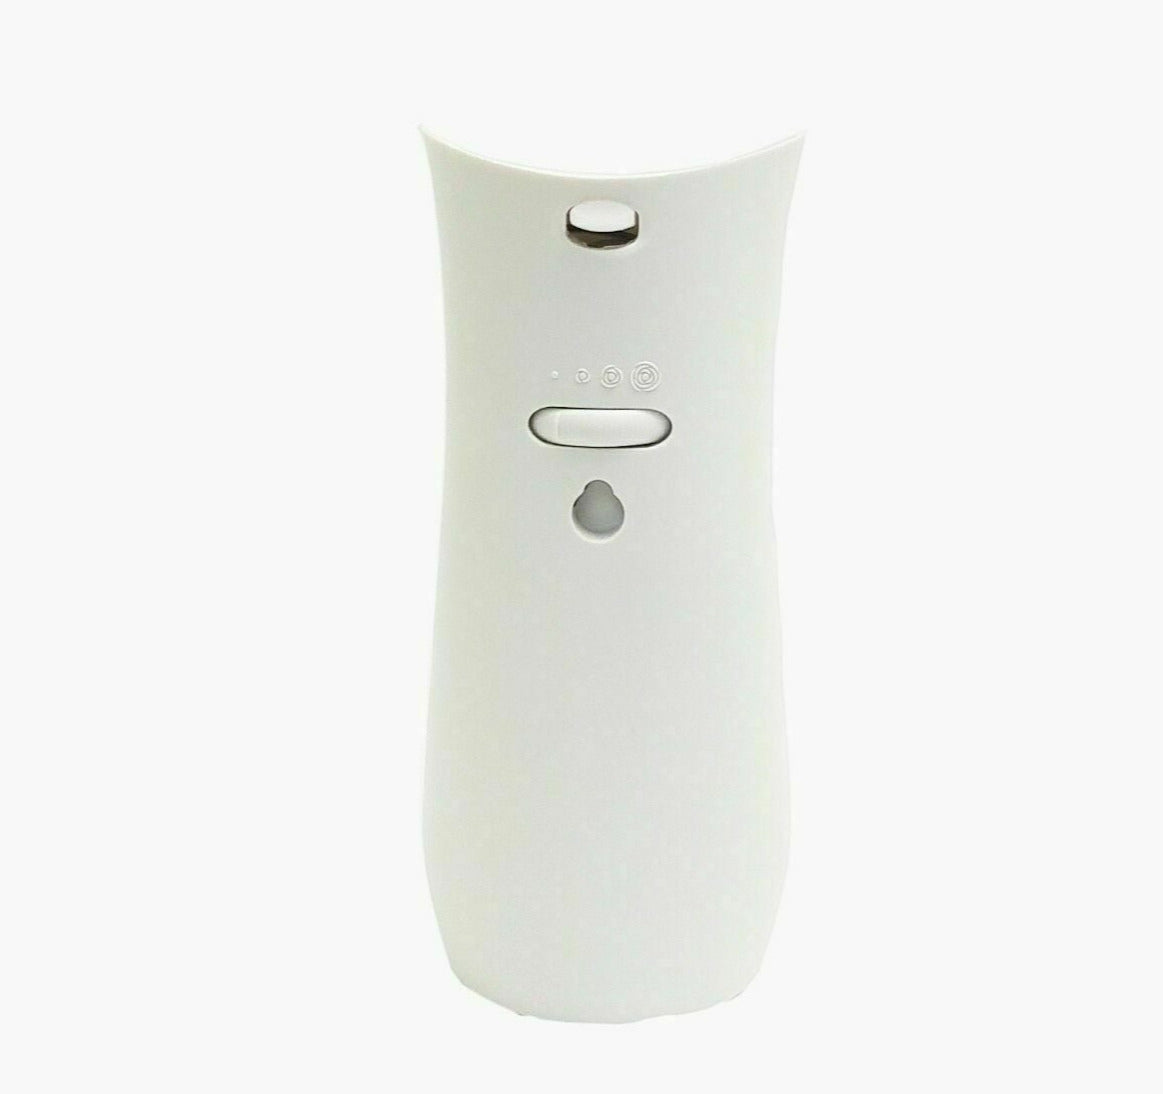 Automatic air freshener dispenser with discreet monitoring capabilities on a white background.